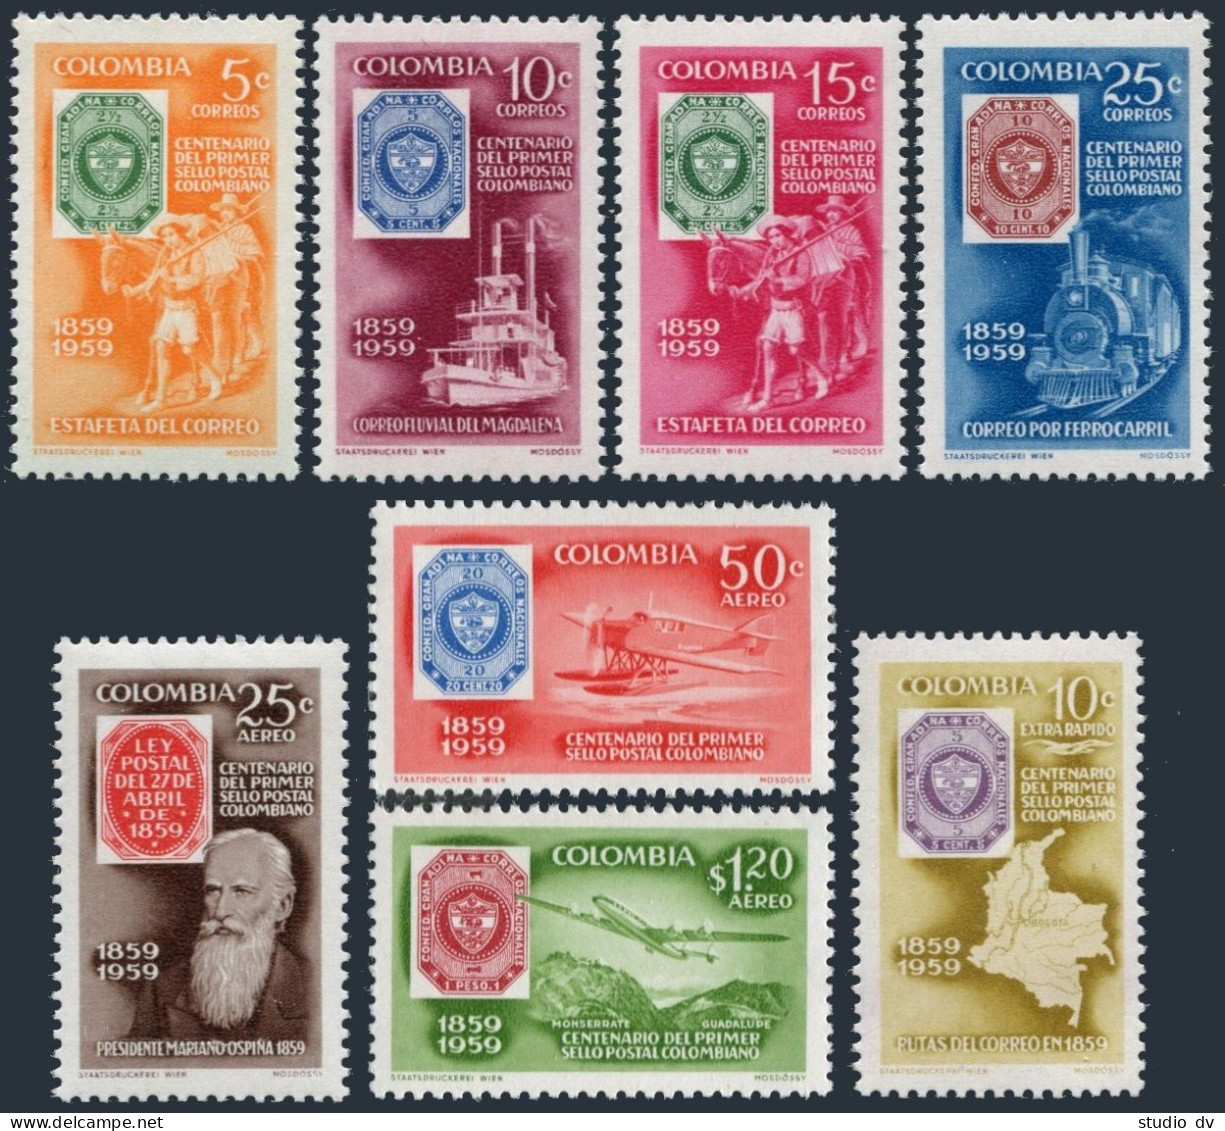 Colombia 709-712,C351-C355,MNH.Mi 884-891,Bl.15. Colombian Stamps-100,1957.Mule, - Colombie